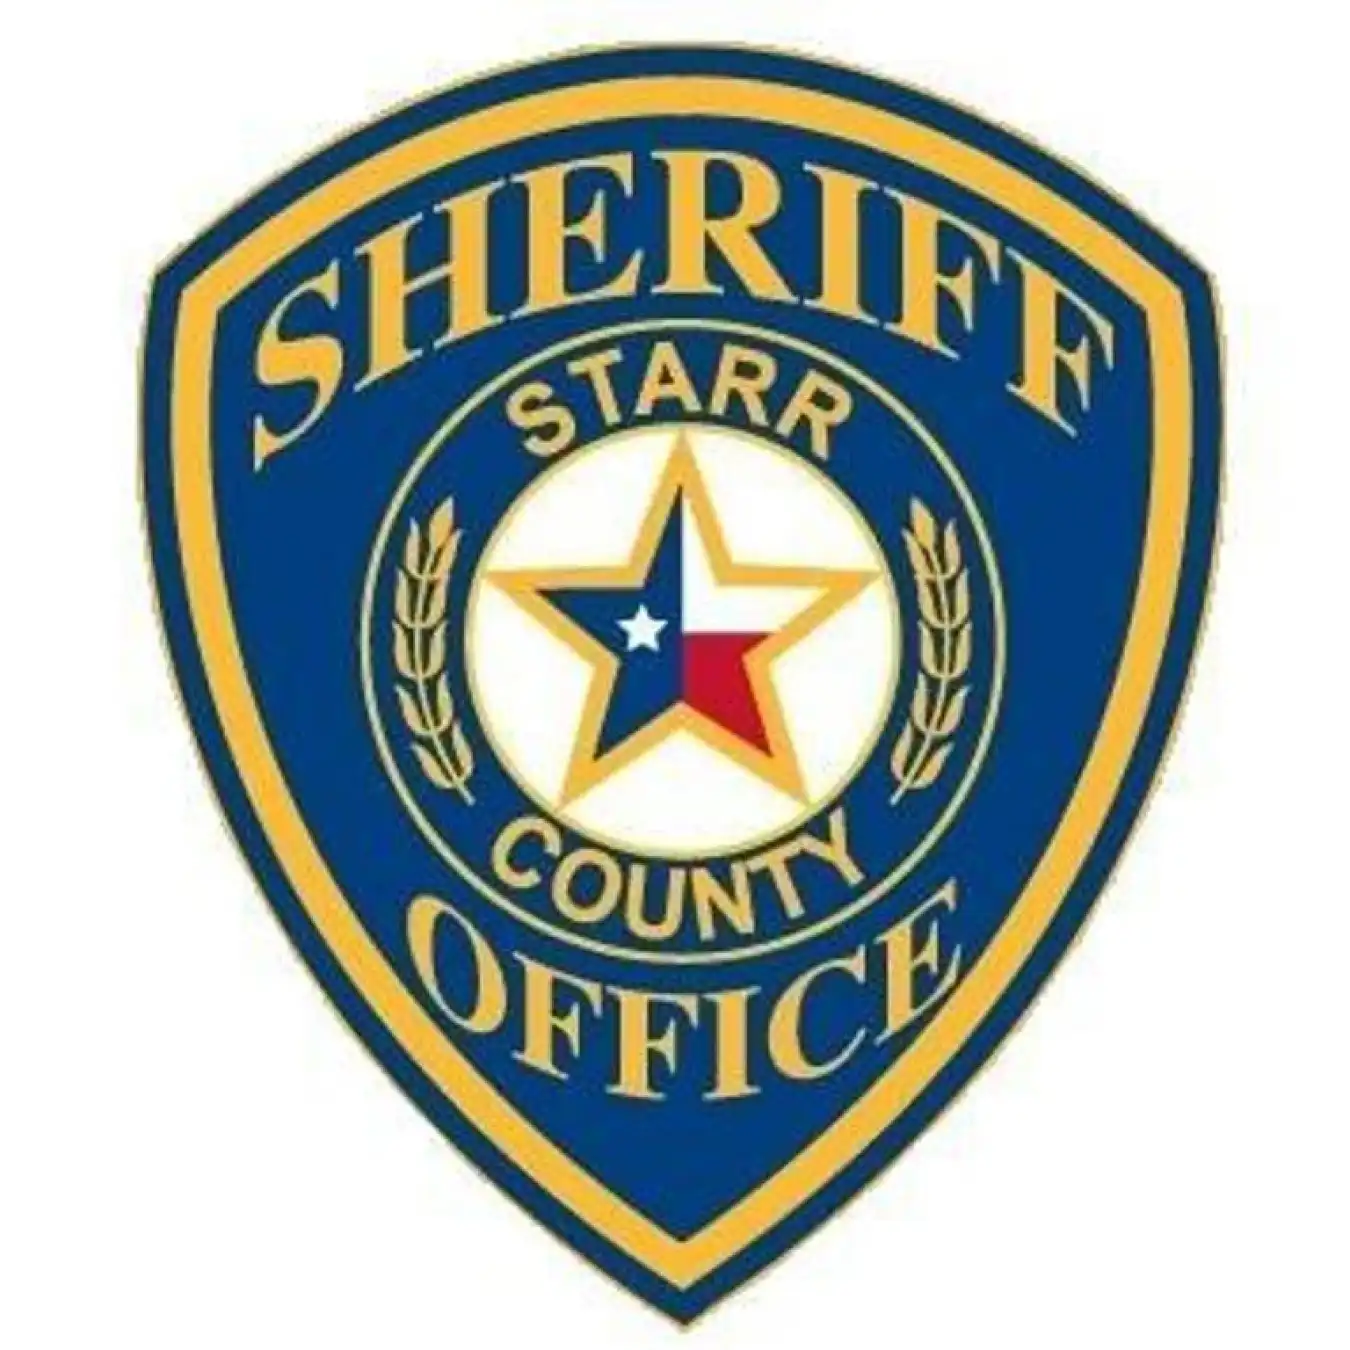 Starr County Sheriff’s Office